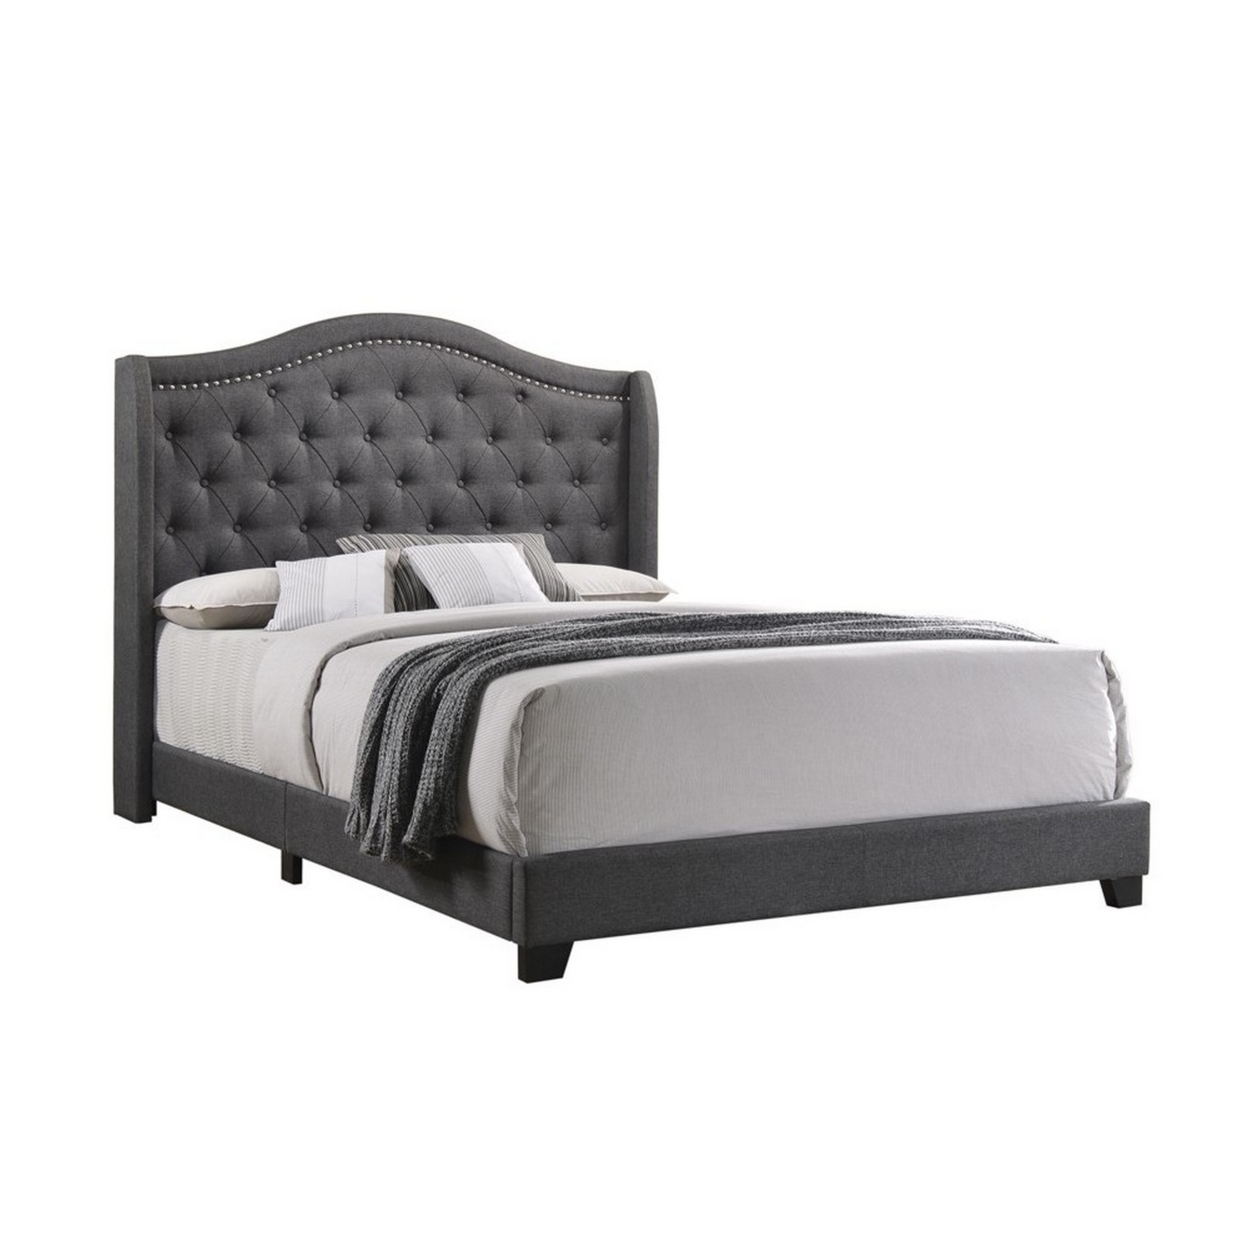 Fabric Upholstered Wooden Demi Wing Queen Bed With Camelback Headboard,Gray- Saltoro Sherpi